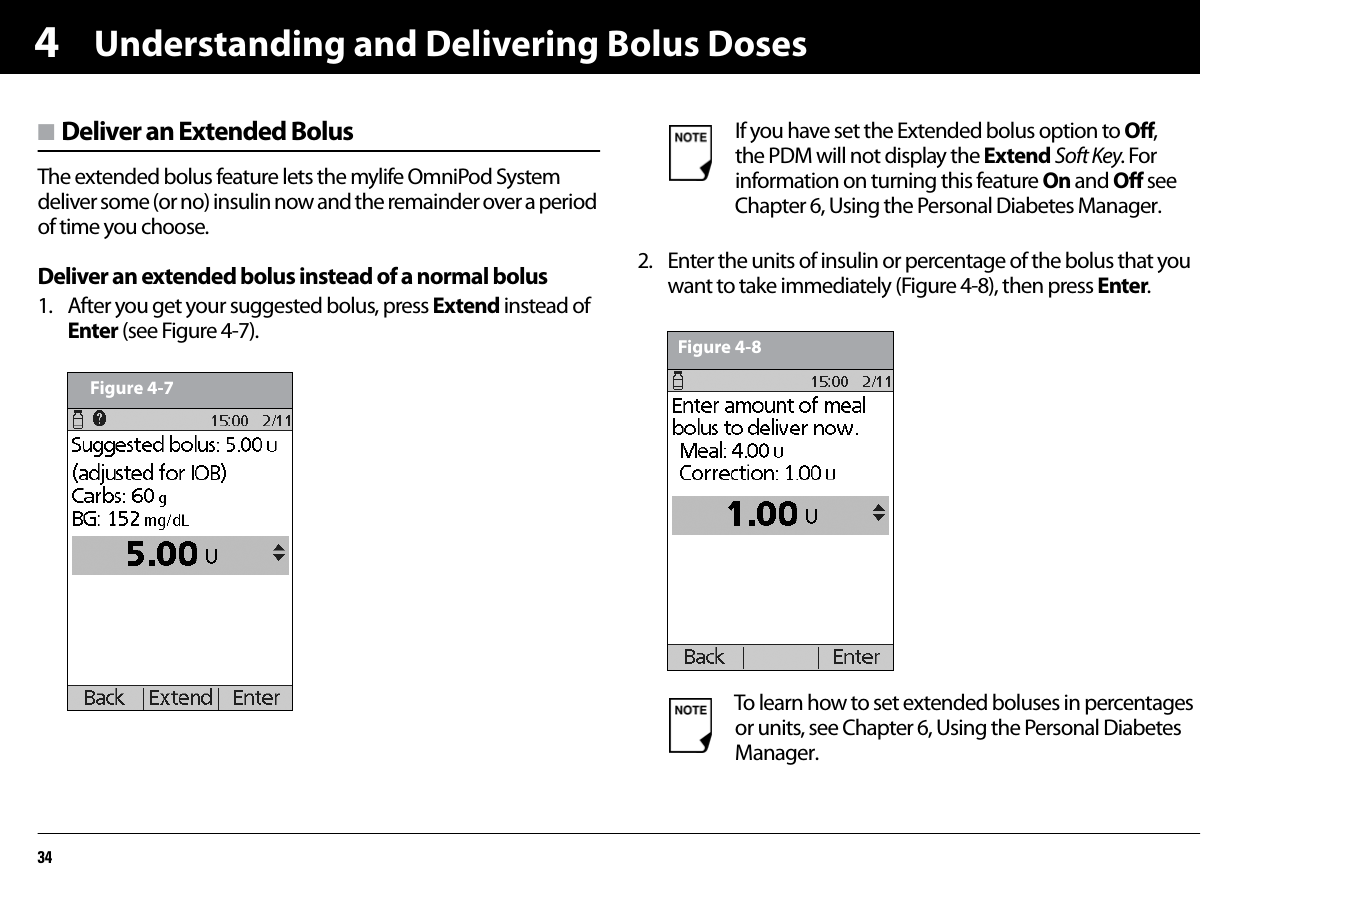 Understanding and Delivering Bolus Doses344n Deliver an Extended BolusThe extended bolus feature lets the mylife OmniPod System deliver some (or no) insulin now and the remainder over a period of time you choose.Deliver an extended bolus instead of a normal bolus1. After you get your suggested bolus, press Extend instead of Enter (see Figure 4-7).2. Enter the units of insulin or percentage of the bolus that you want to take immediately (Figure 4-8), then press Enter.  Figure 4-7If you have set the Extended bolus option to Off, the PDM will not display the Extend Soft Key. For information on turning this feature On and Off see Chapter 6, Using the Personal Diabetes Manager.To learn how to set extended boluses in percentages or units, see Chapter 6, Using the Personal Diabetes Manager.Figure 4-8